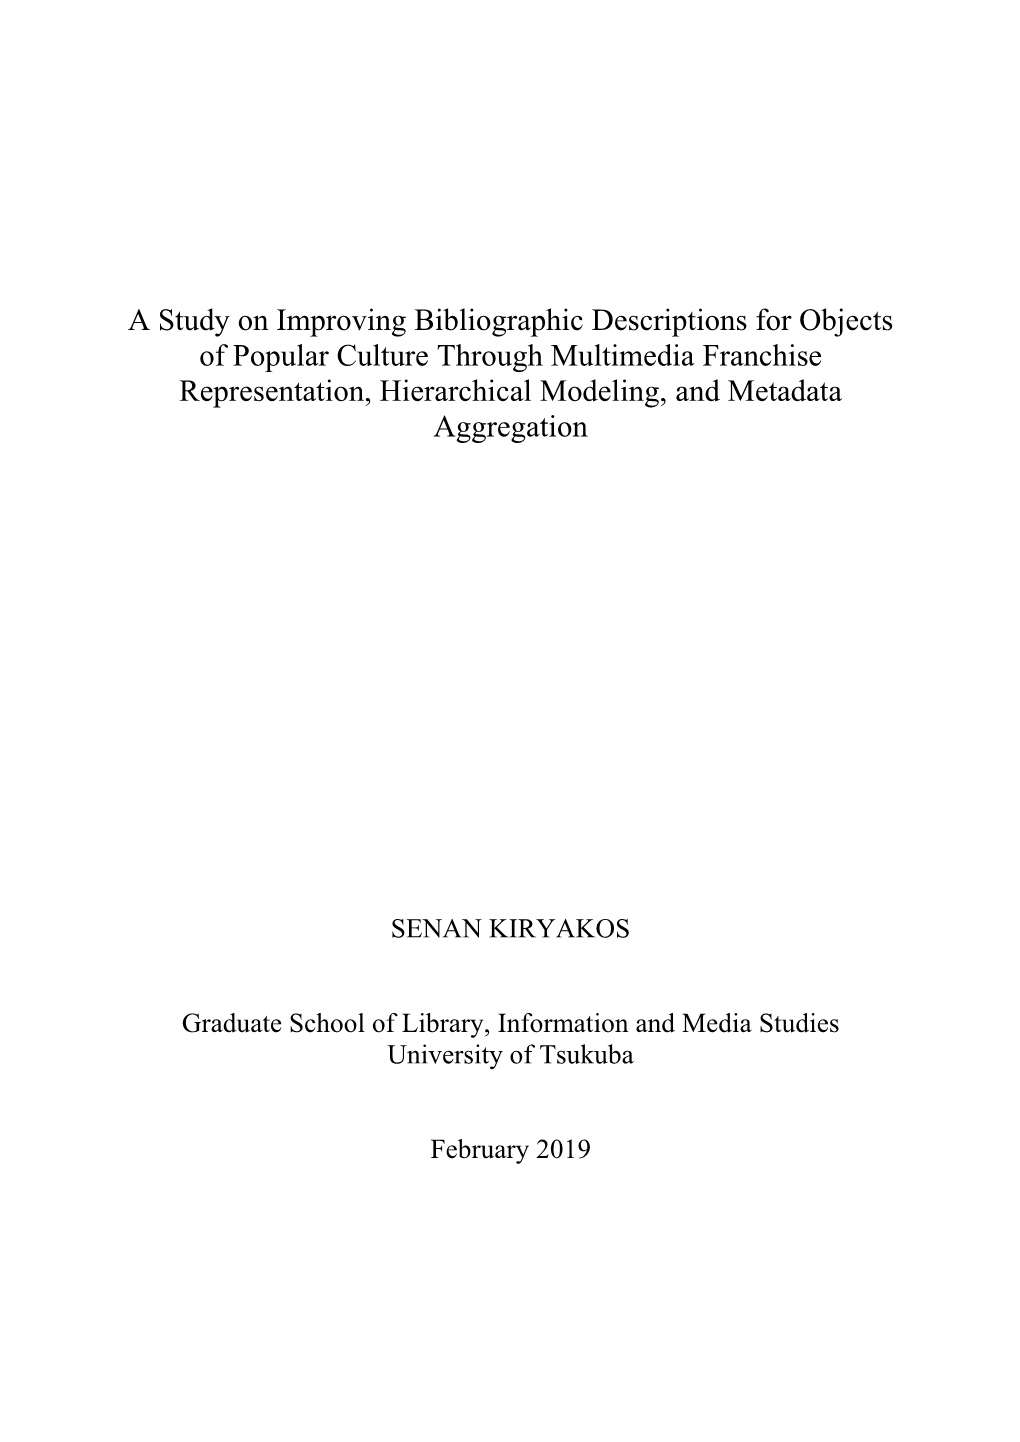 A Study on Improving Bibliographic Descriptions for Objects of Popular